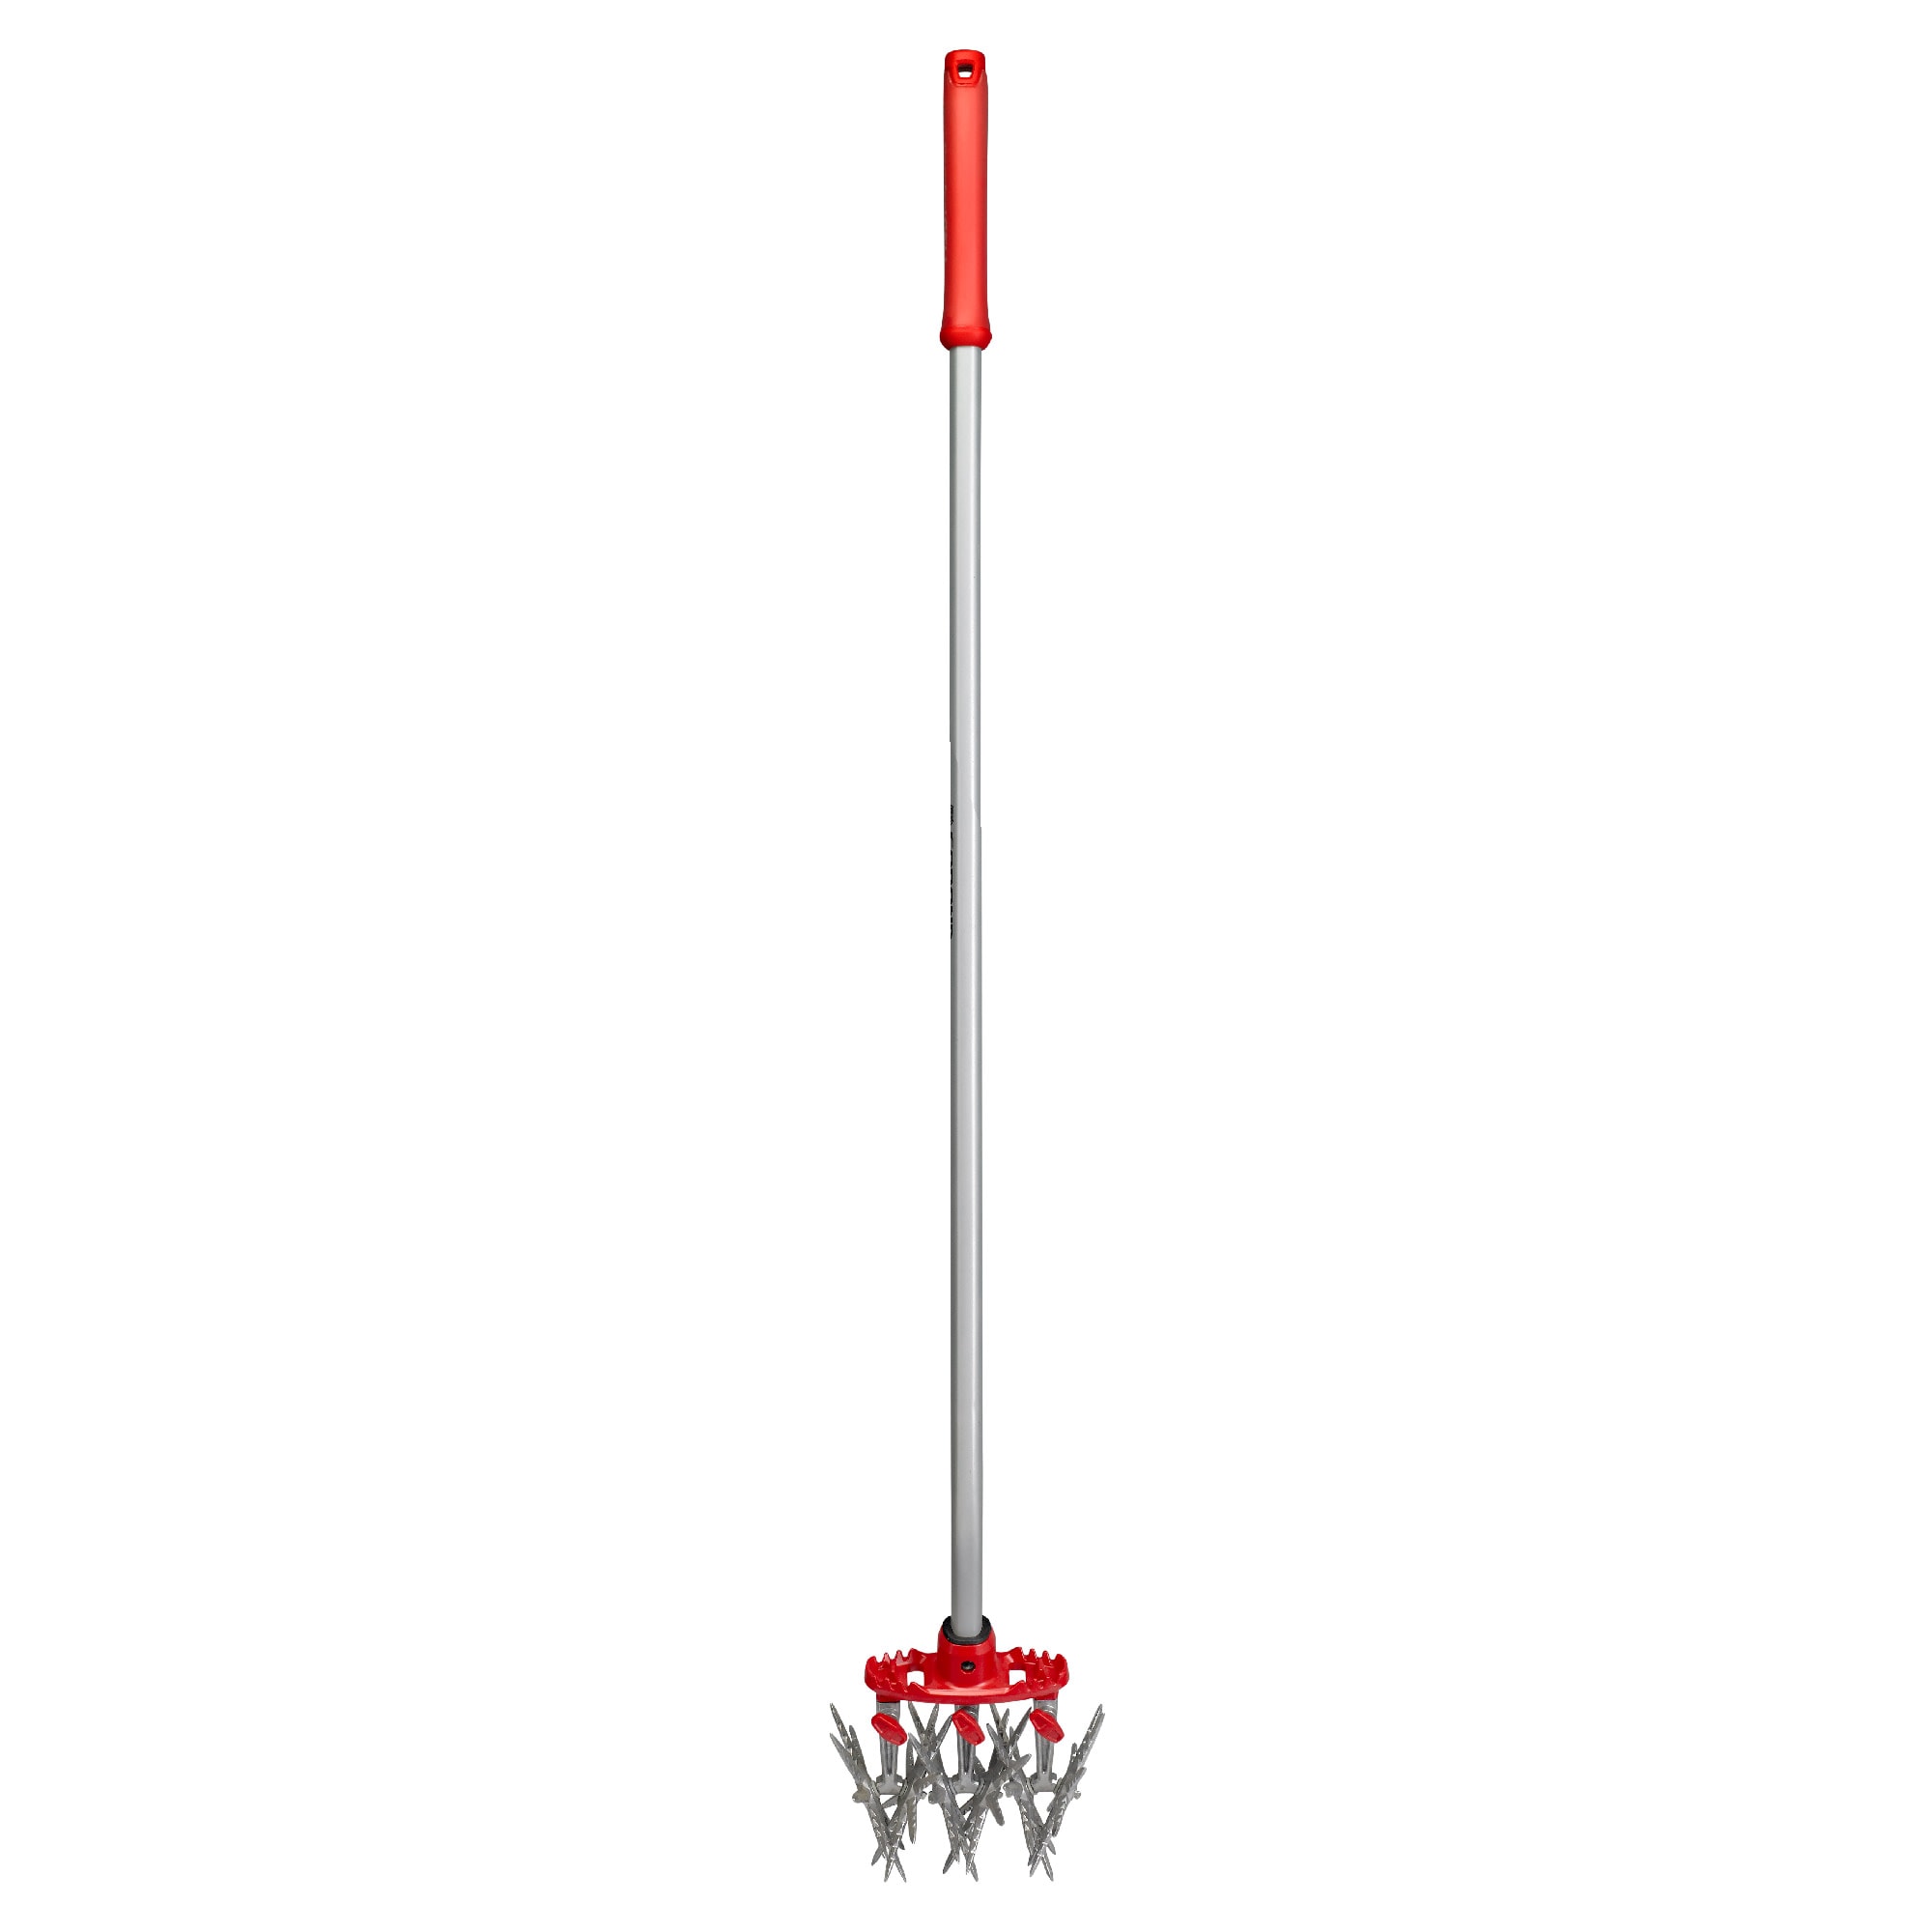 Image of Hand cultivator lowes